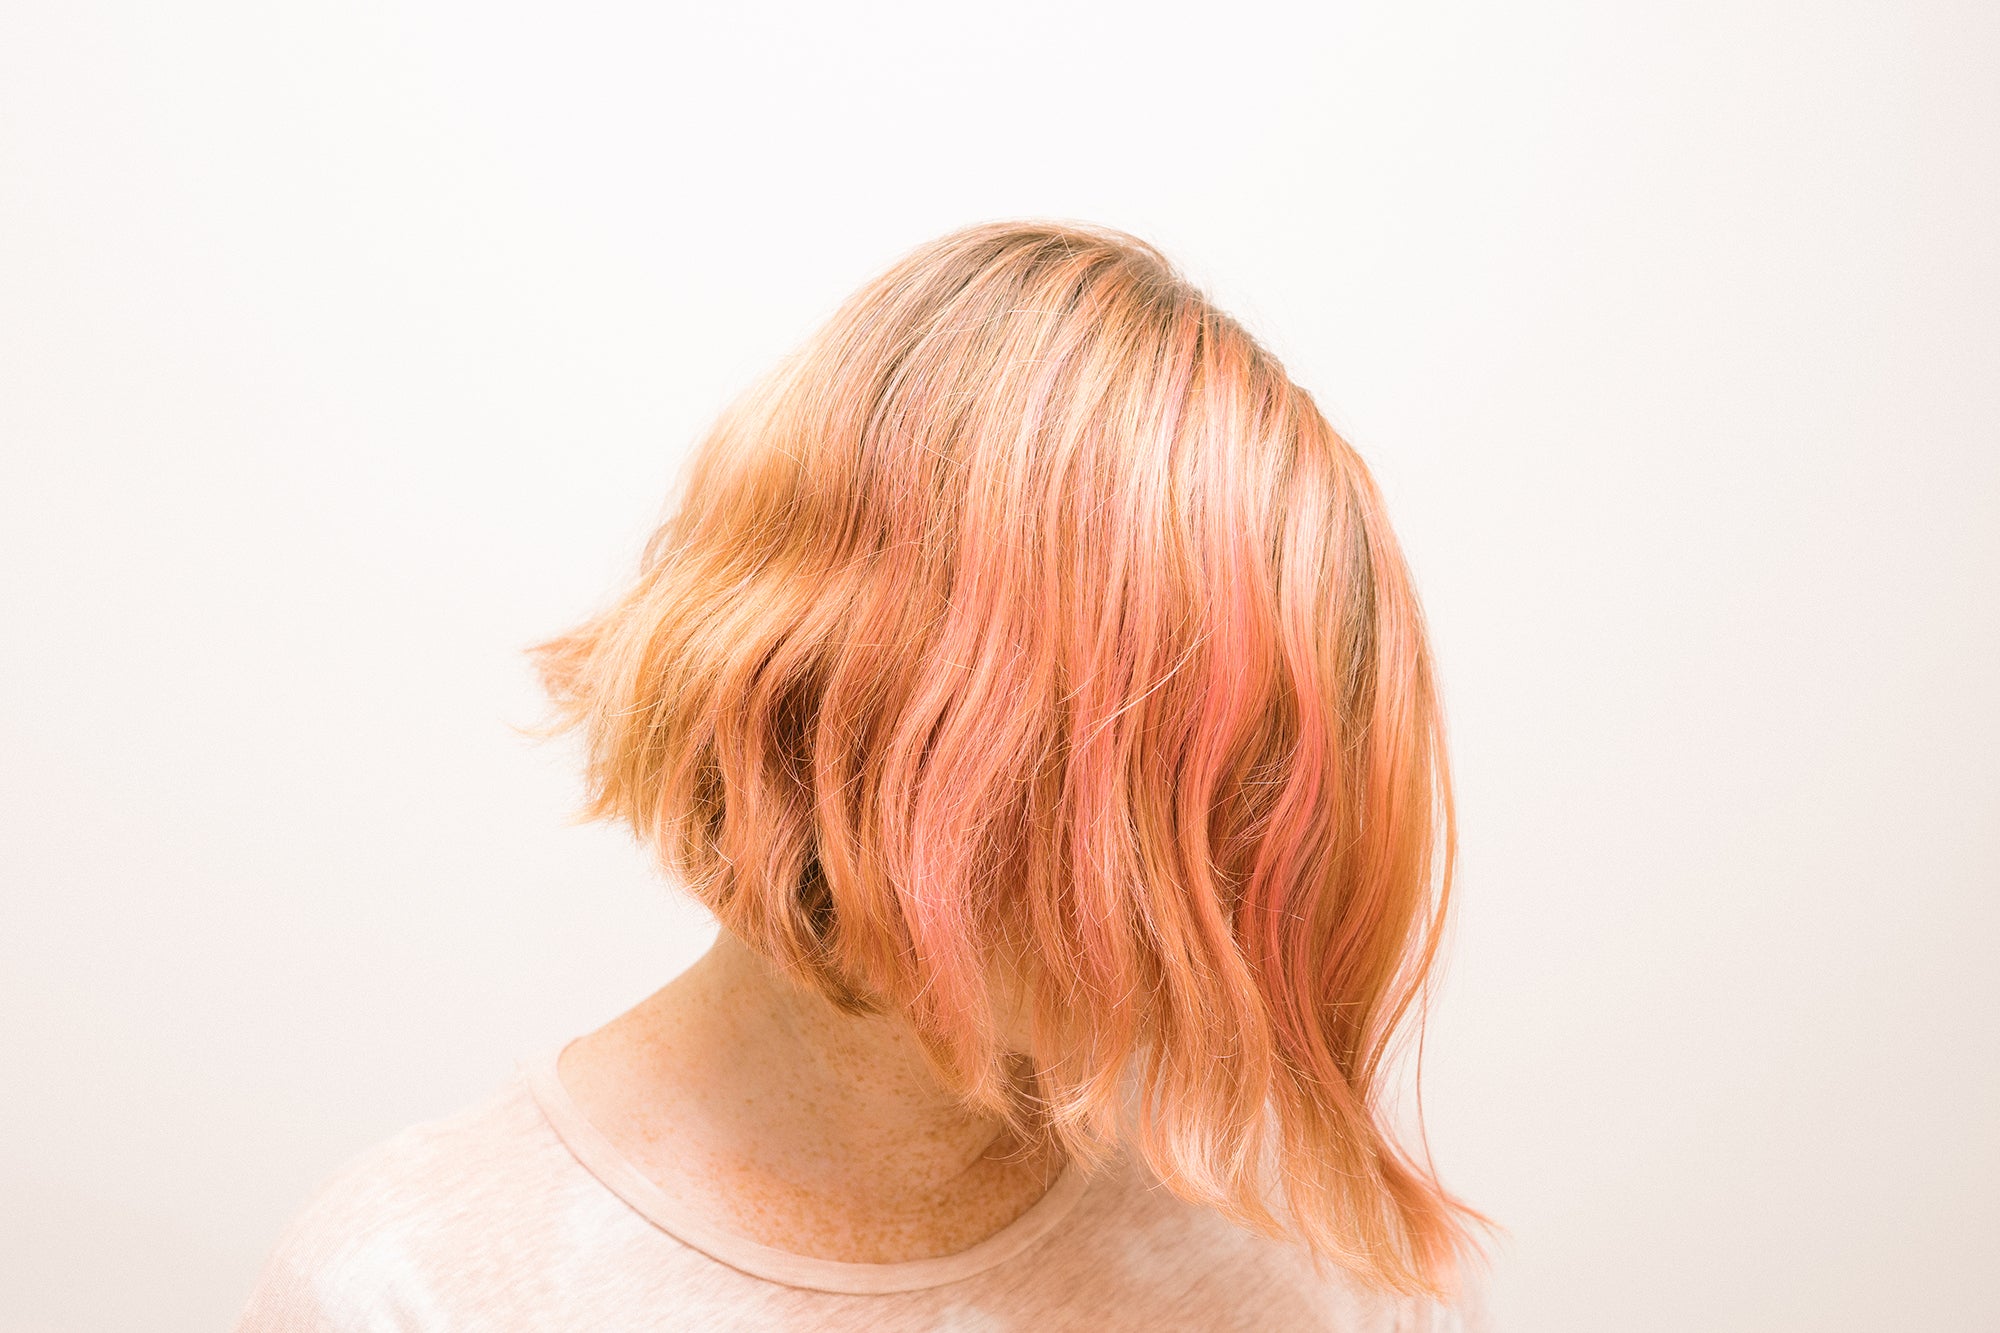 Pink Hair Don't Care: How I Keep My Pink Hair Healthy and Vibrant